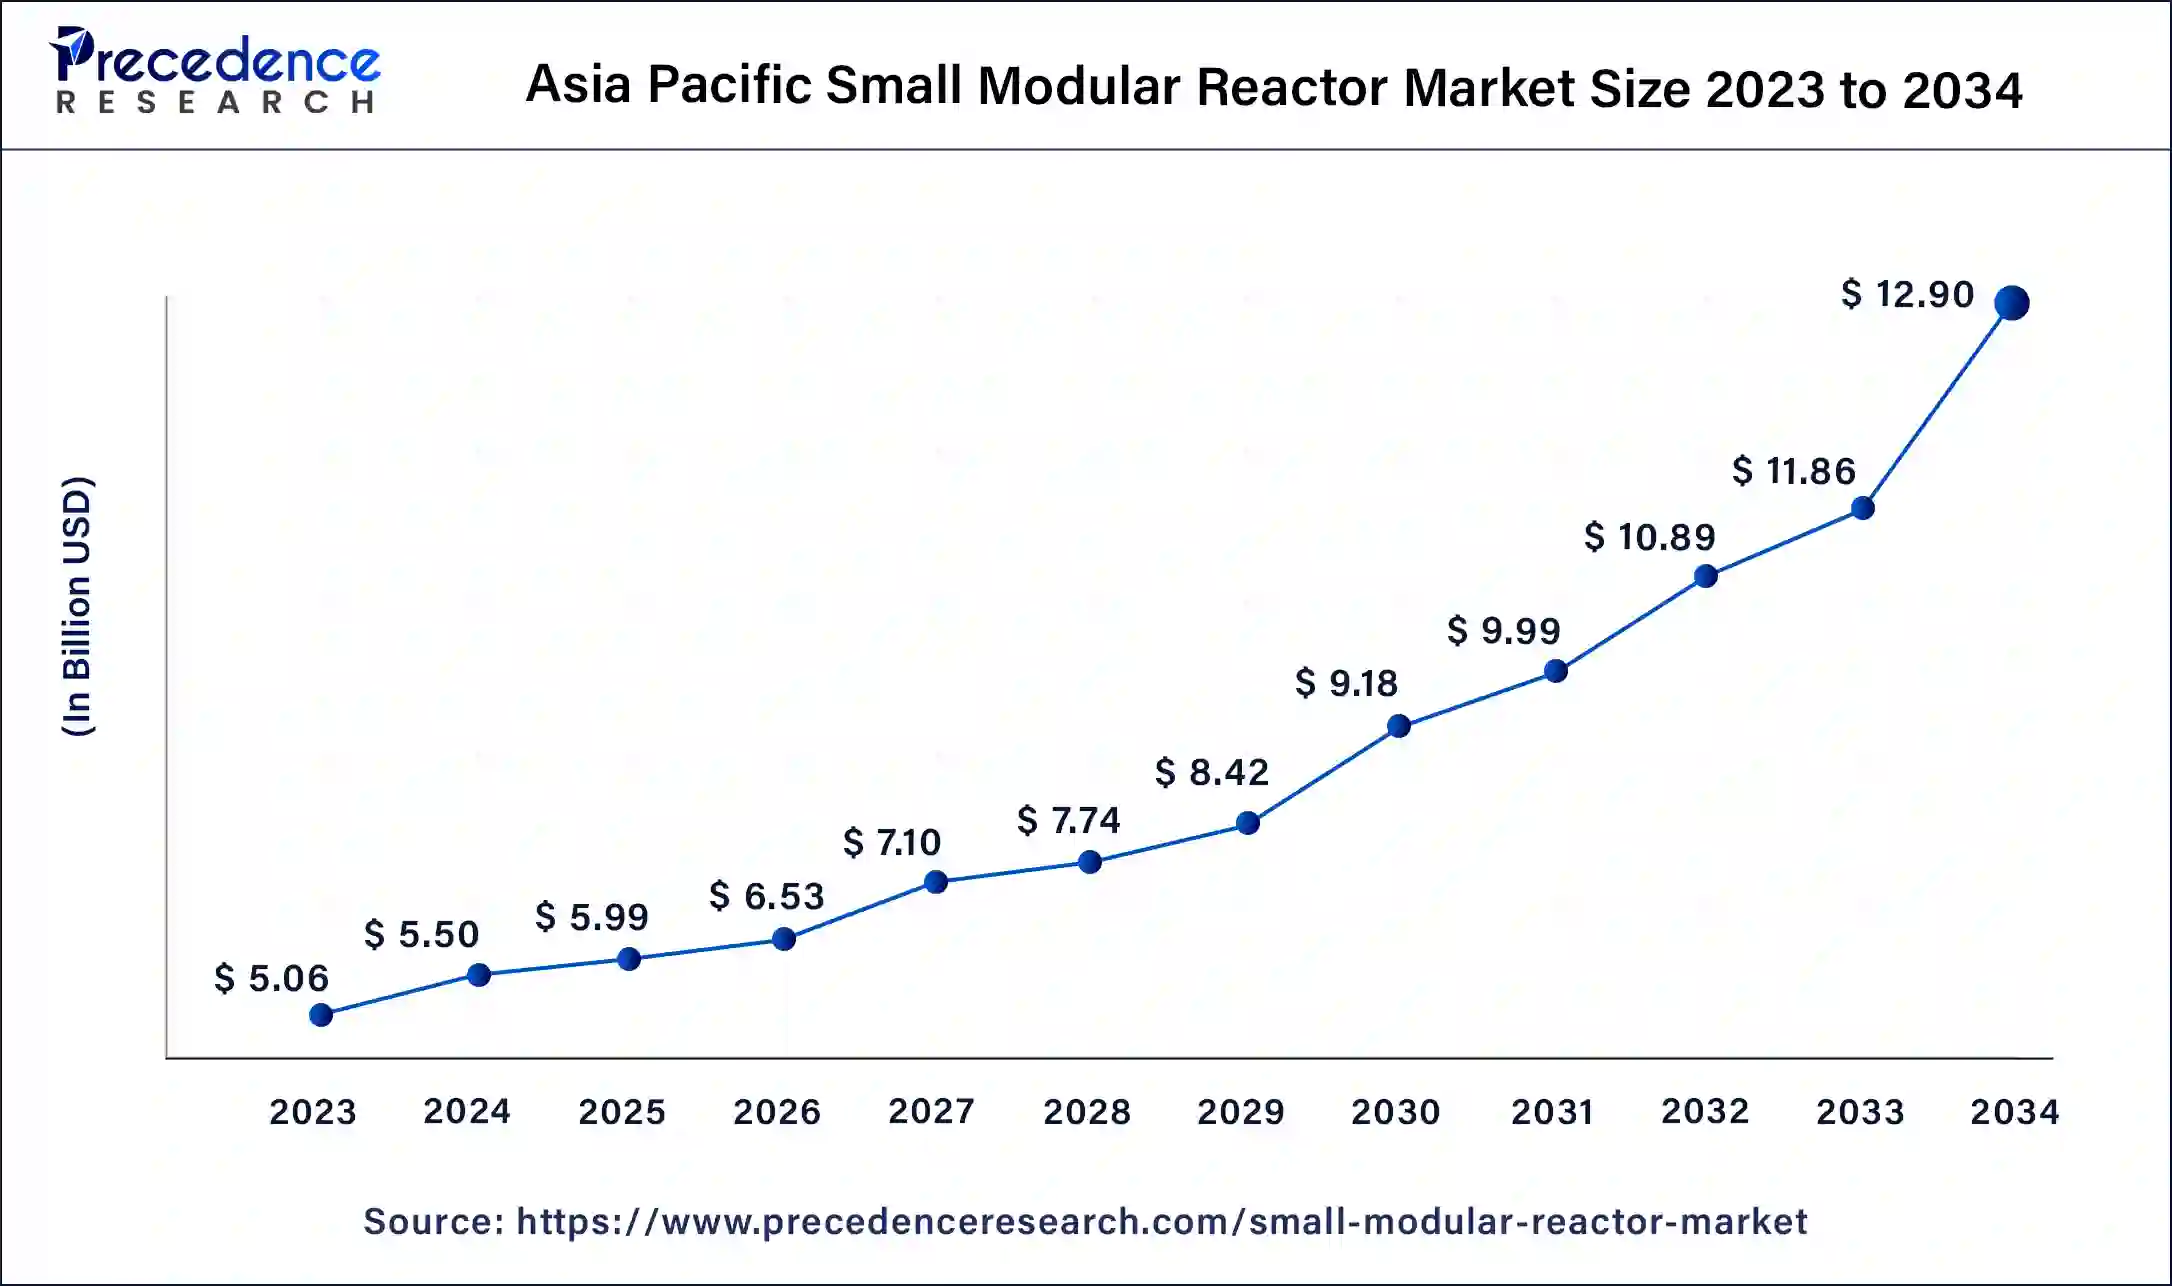 Asia Pacific Small Modular Reactor Market Size 2024 to 2034